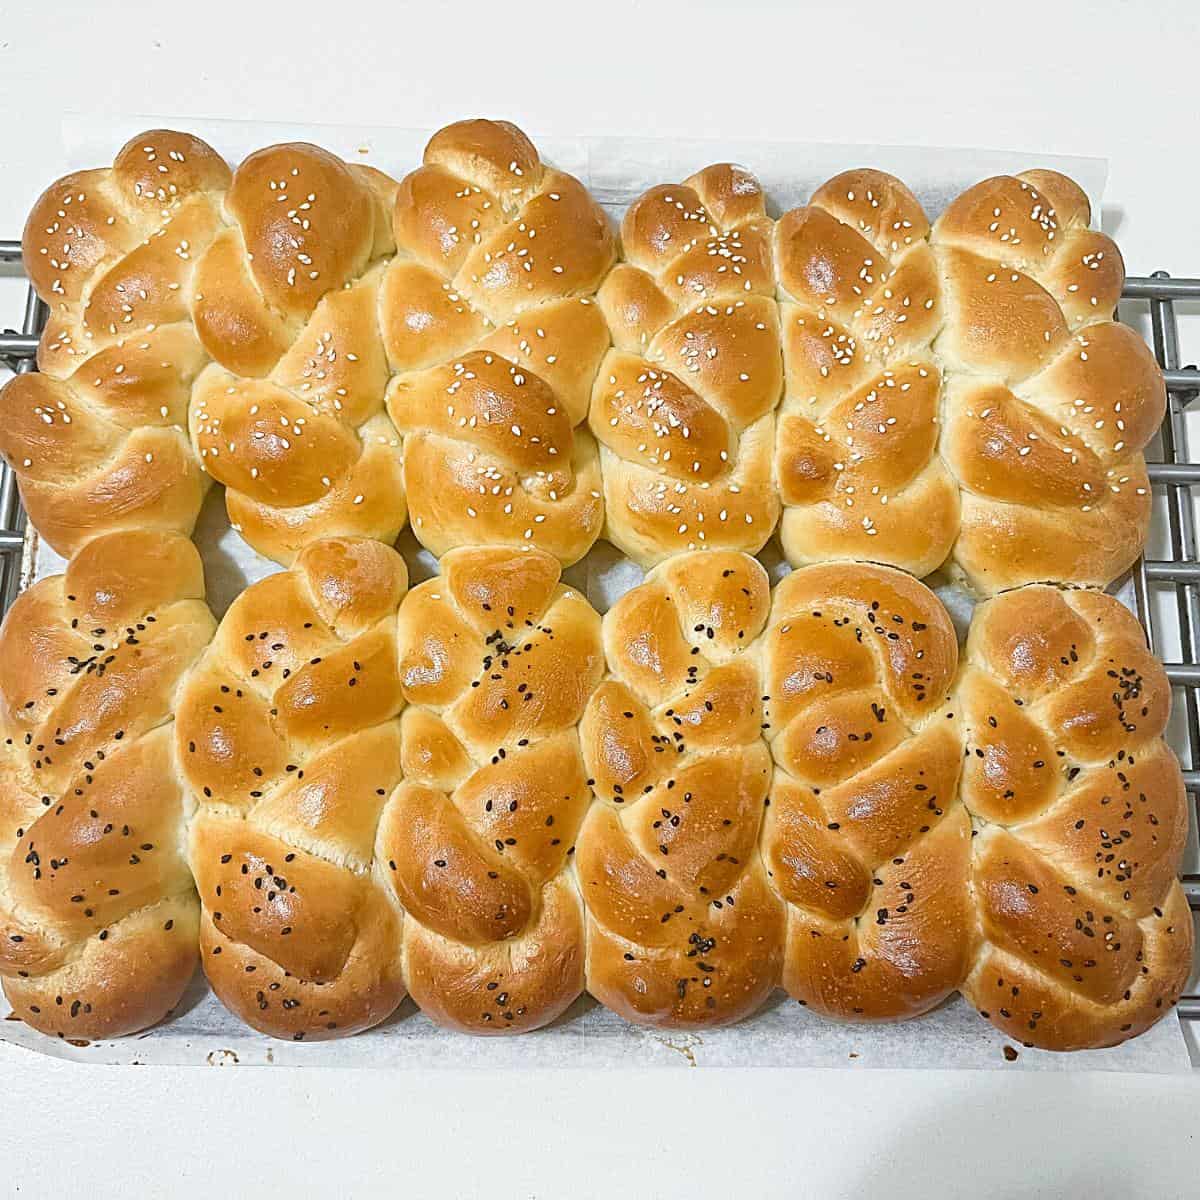 Braided challah rolls on the cooling rack.